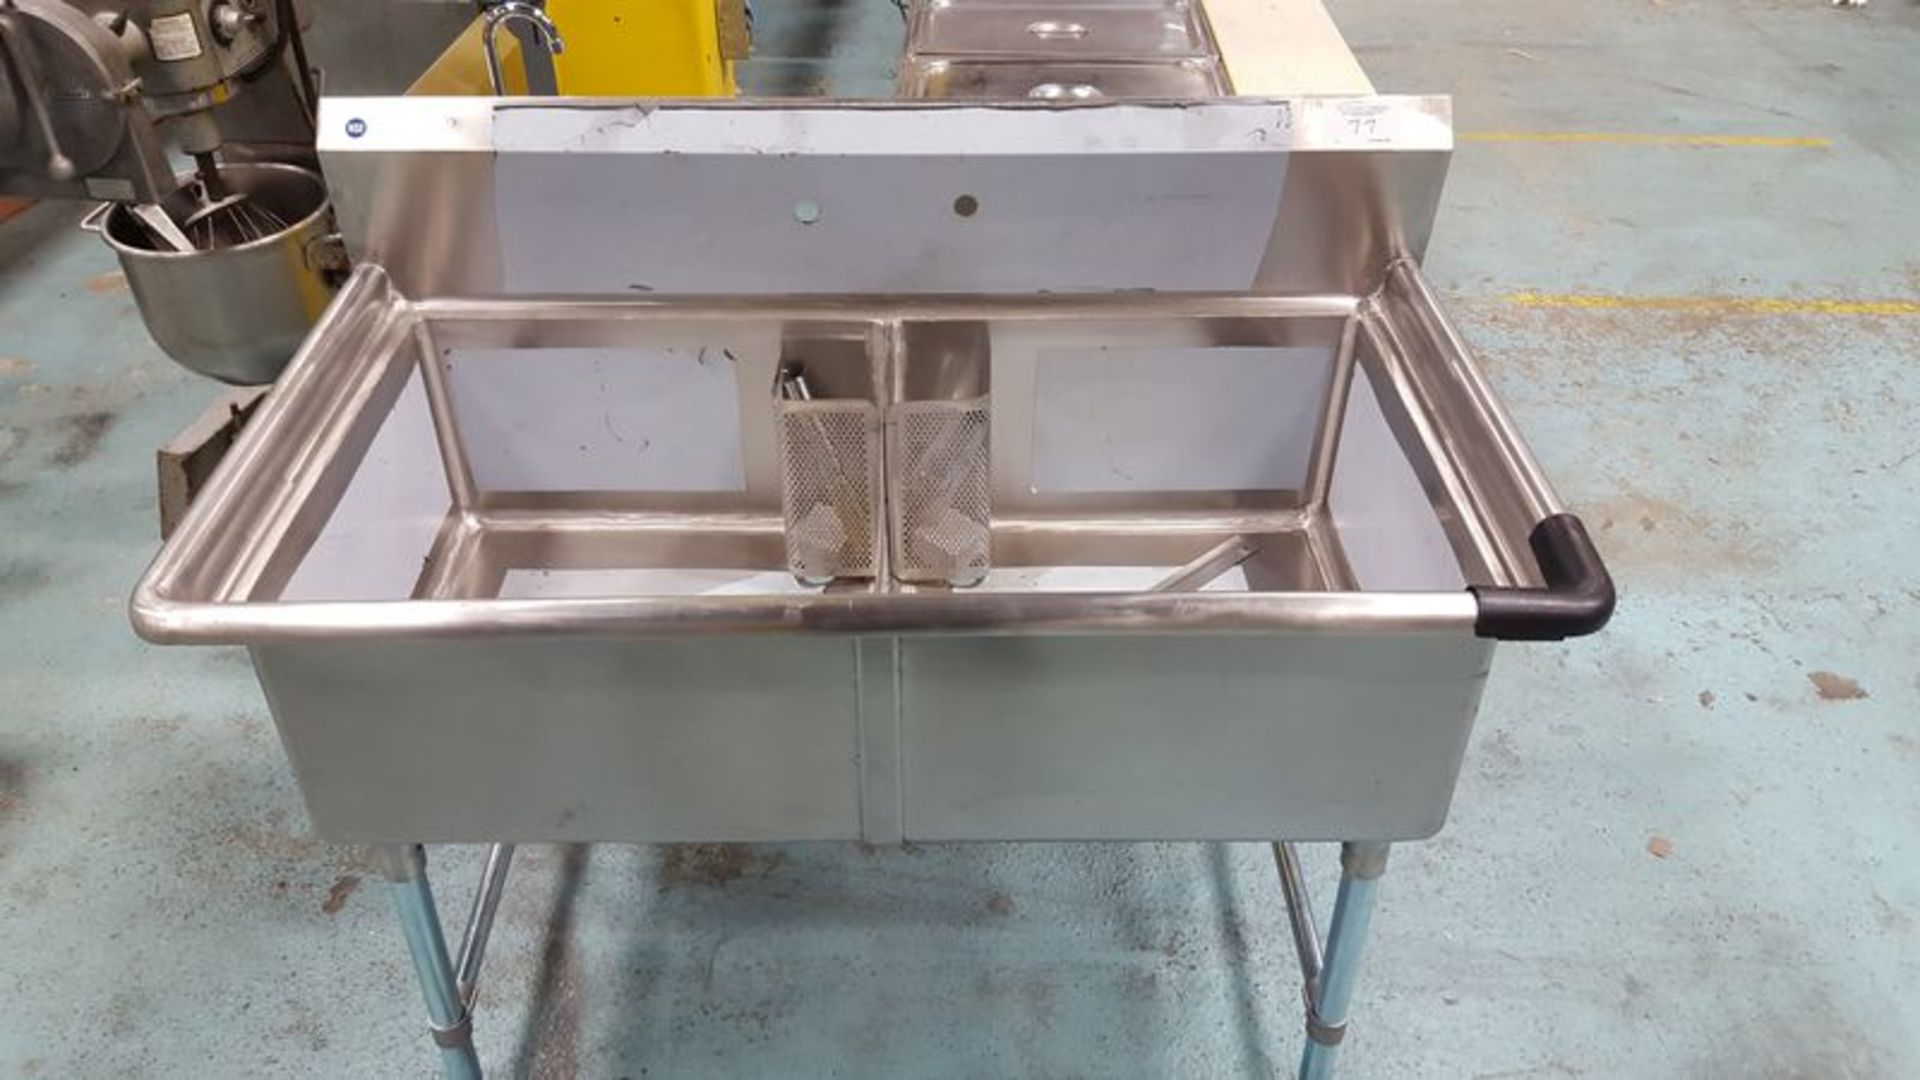 54" - 2 compartment stainless steel sink